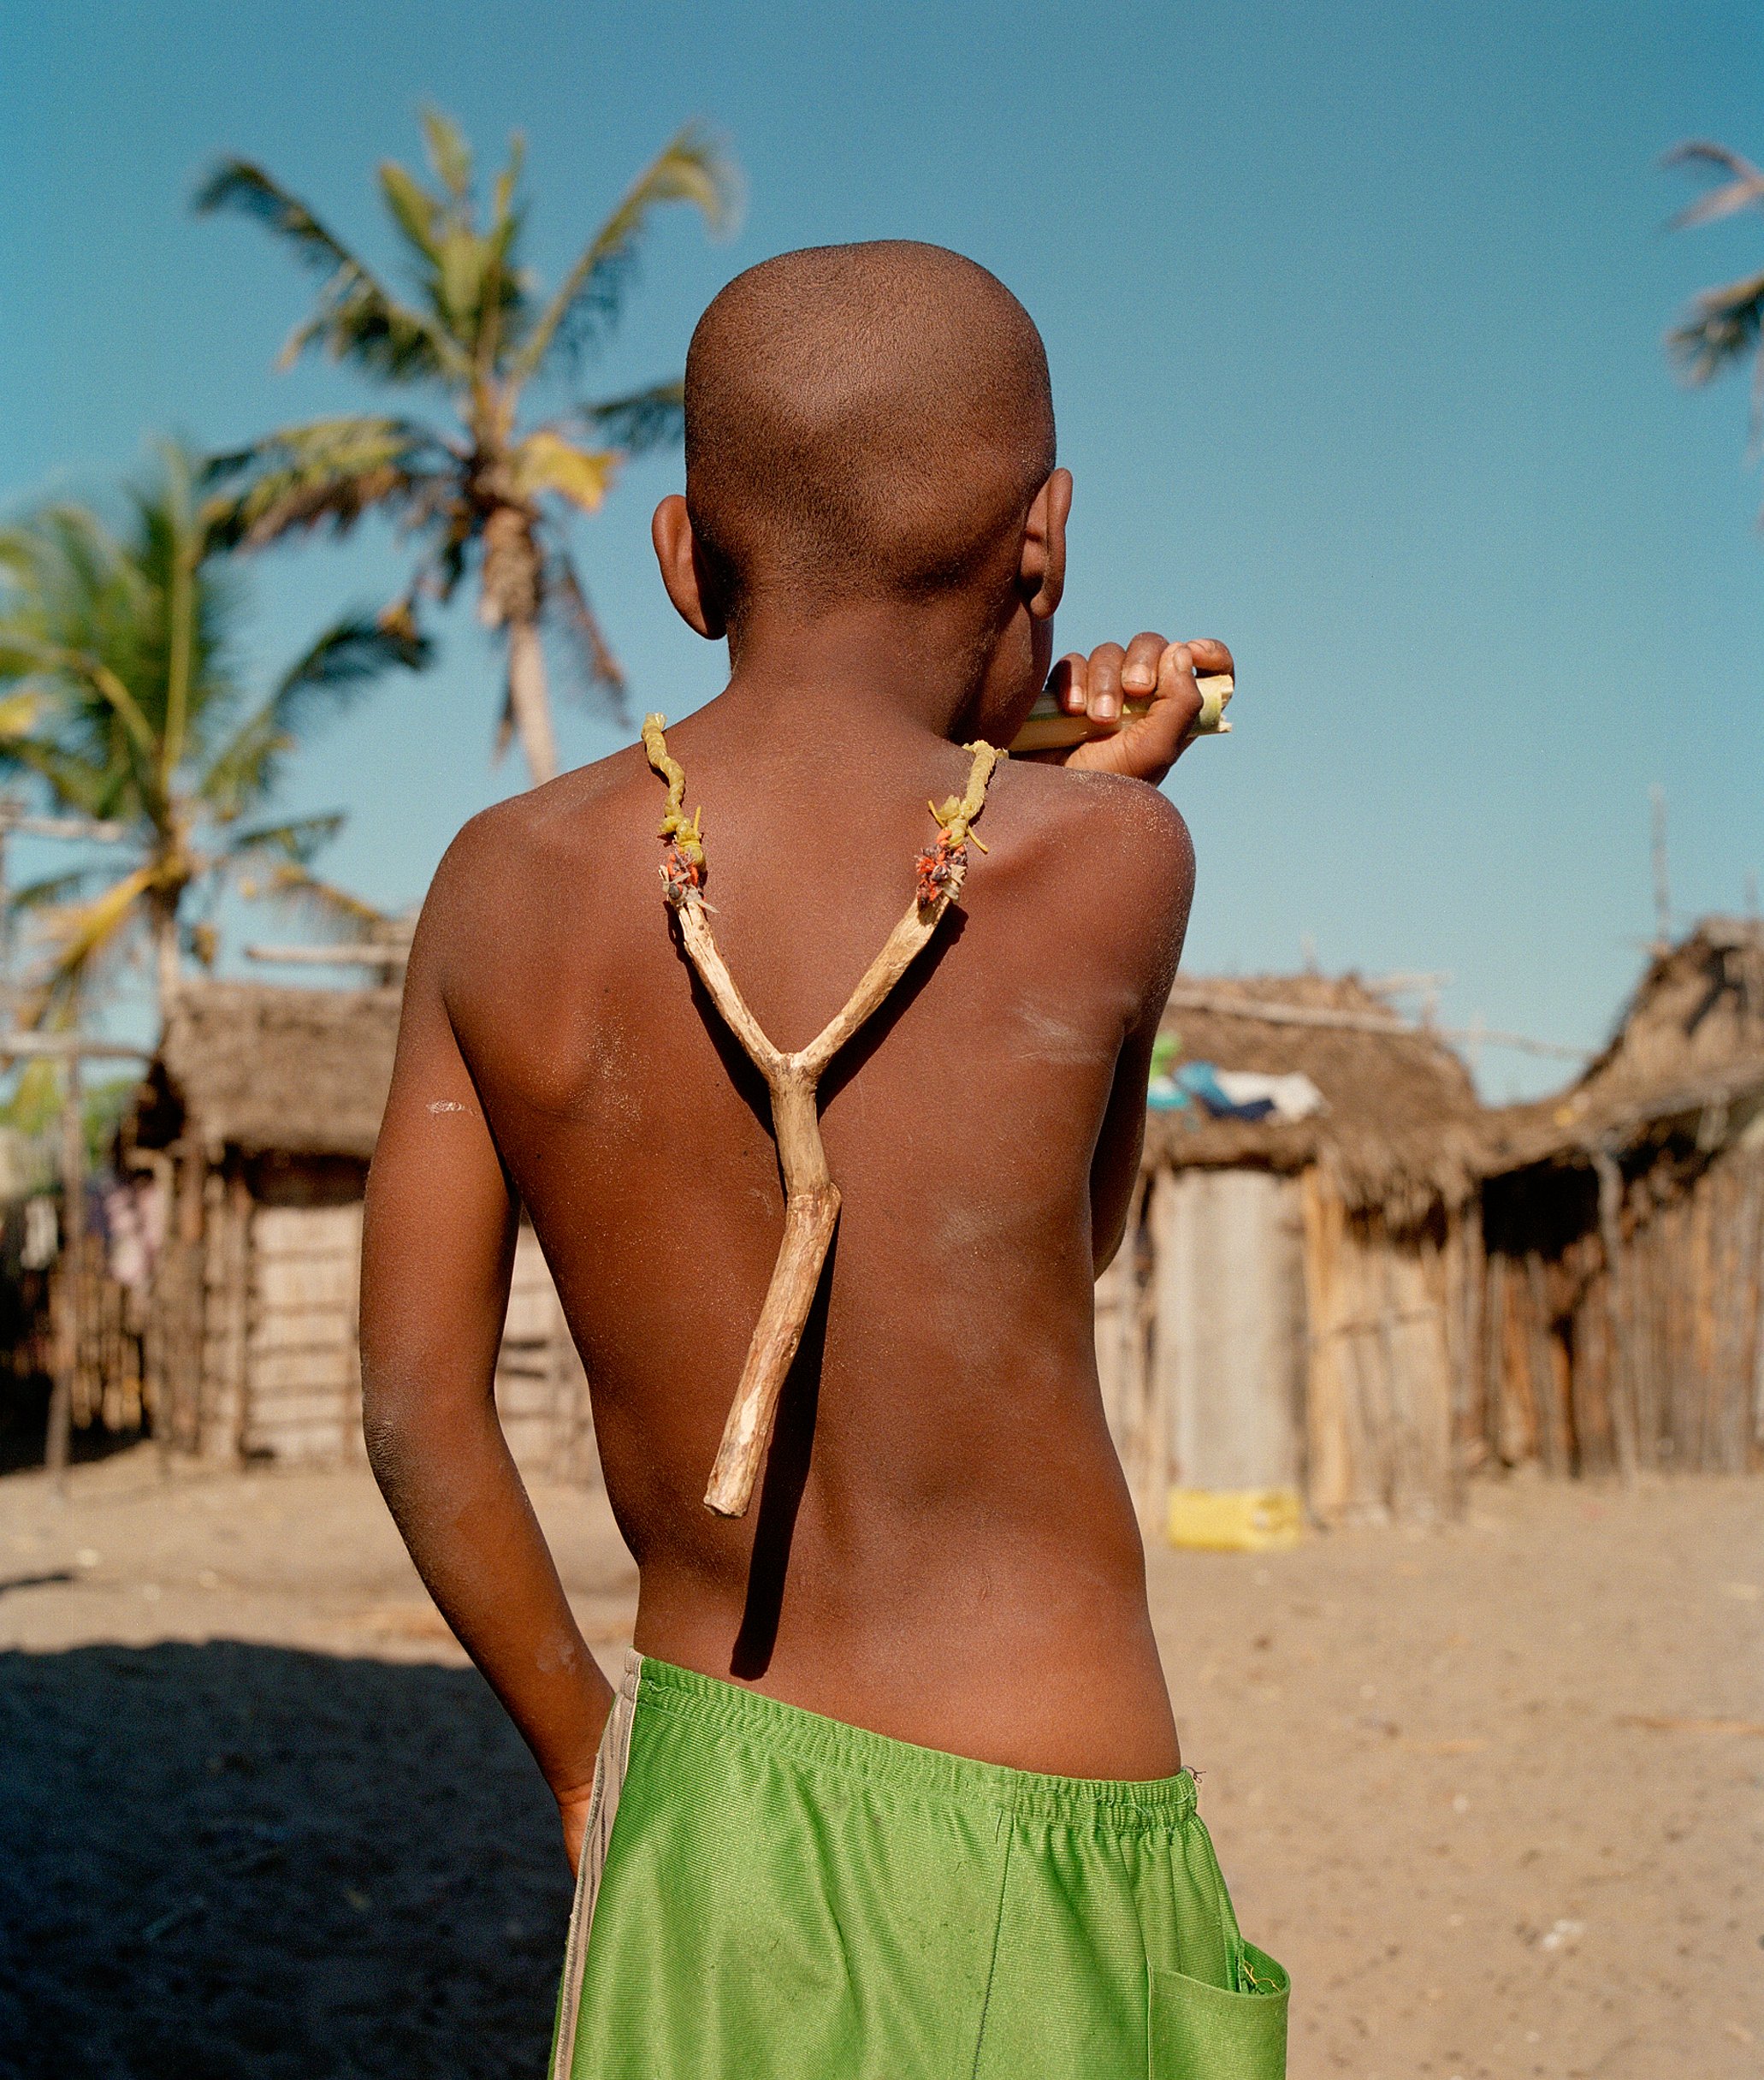  A Young Boy with sugar cane and catapult, Madagascar  Part of a collection of images for WWF that form part of project on the communities that are safe guarding the precious mangroves of East &amp; Southern Africa.     